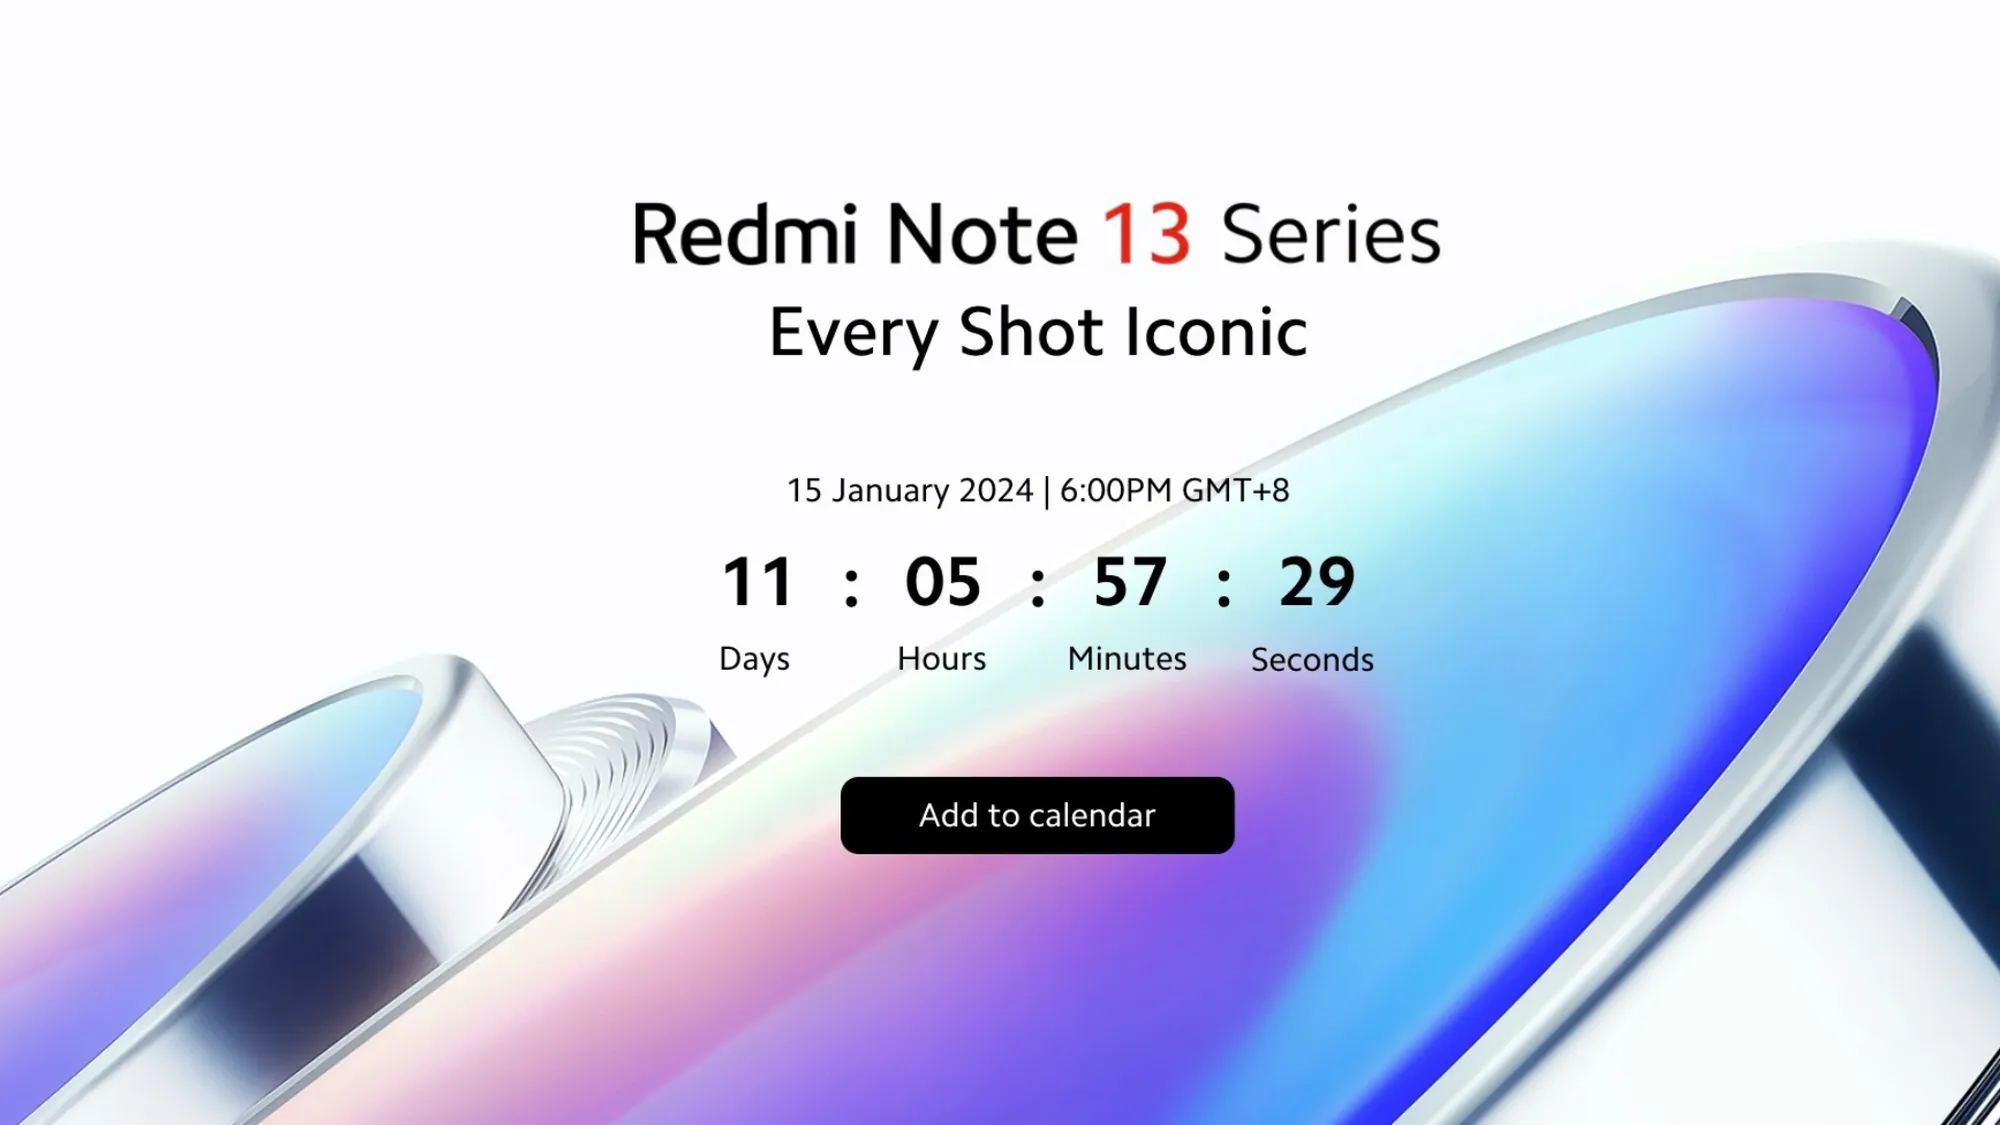 redmi note 13 series malaysian launch on 15 january 2024